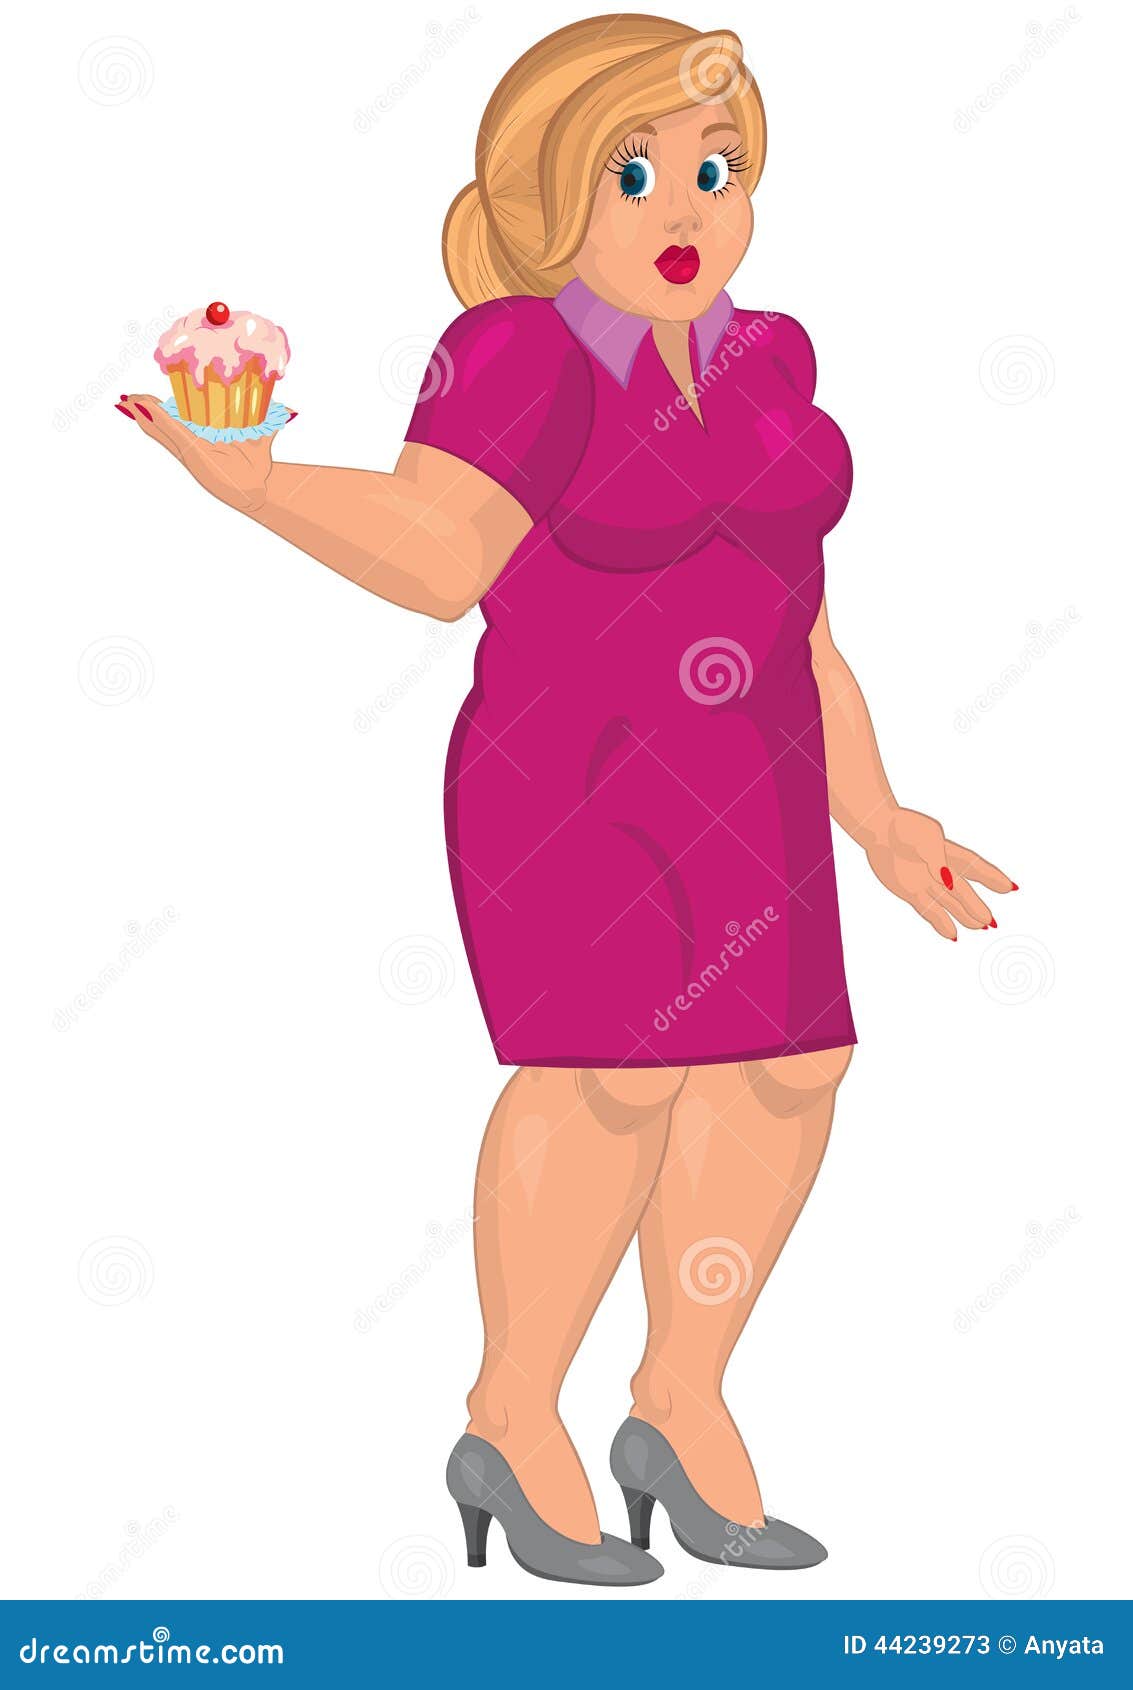 Cartoon Young Fat Woman In Pink Dress Holding Capcake Stock Vector Illustration Of Retro Funny 44239273